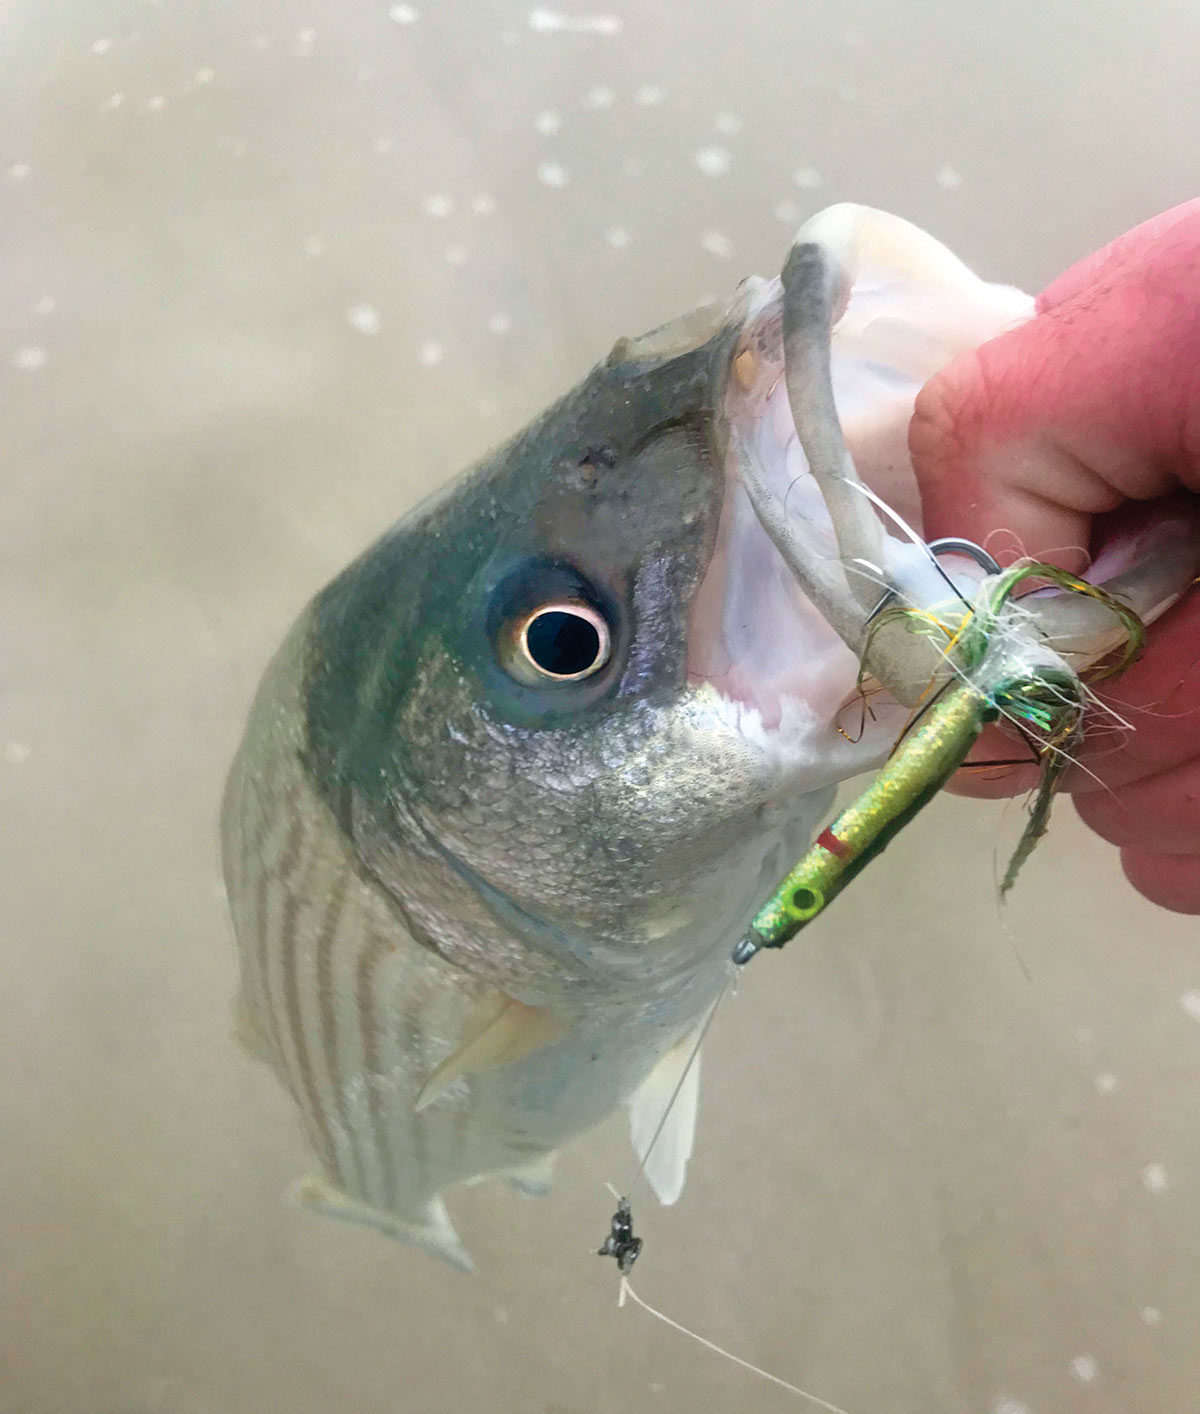 Bait or Plug: Benefits of Artificials Over Natural Baits - The Fisherman